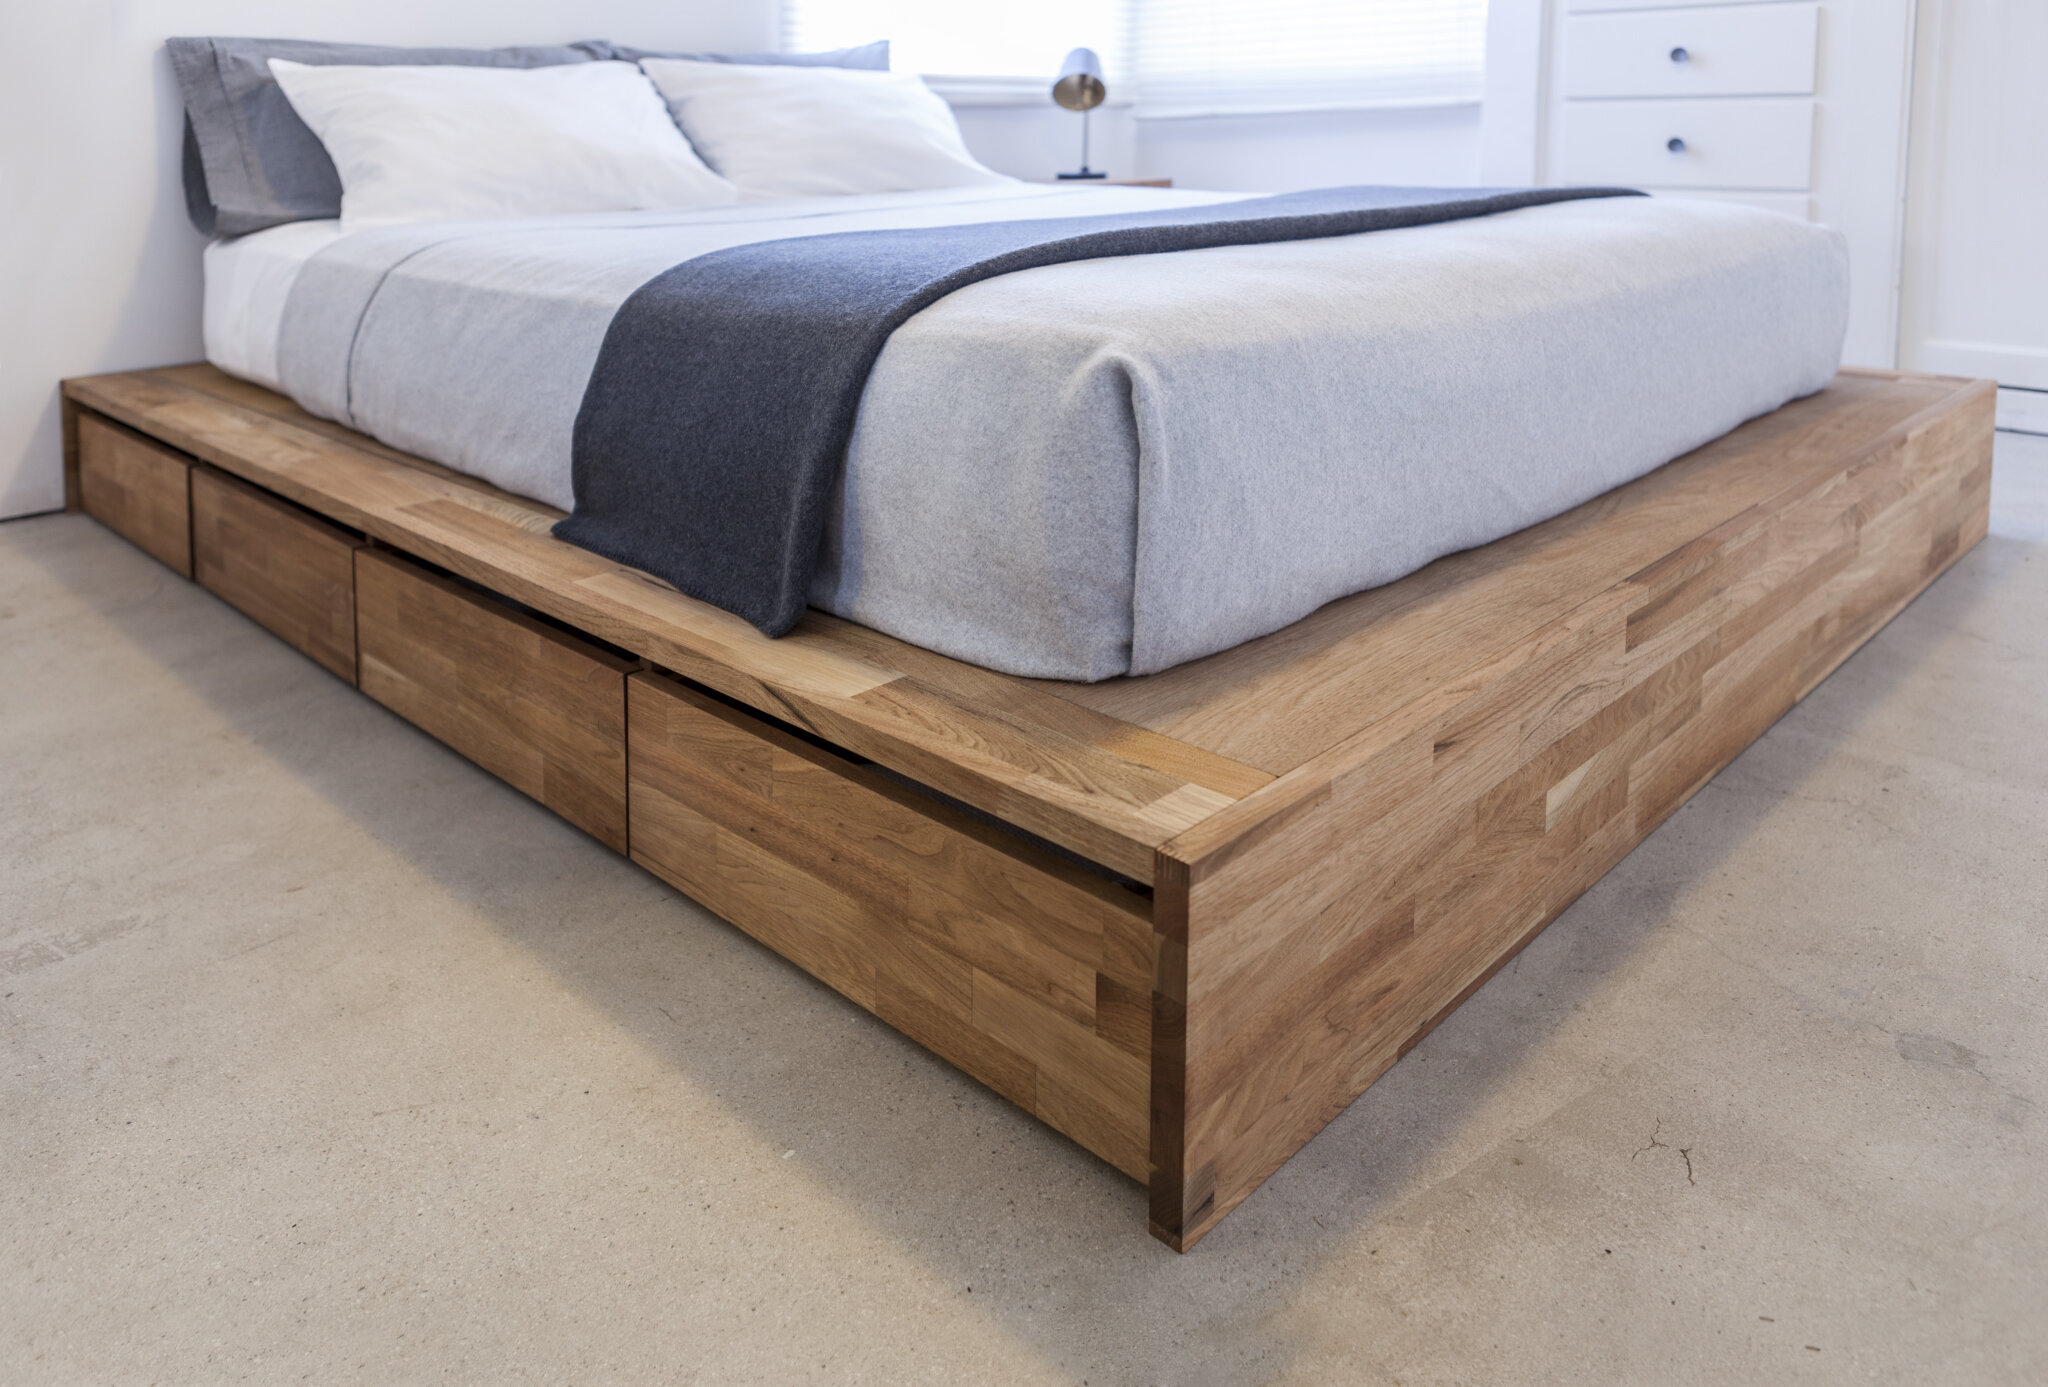 Bed With Drawers Underneath Visualhunt, King Platform Bed With Storage Underneath